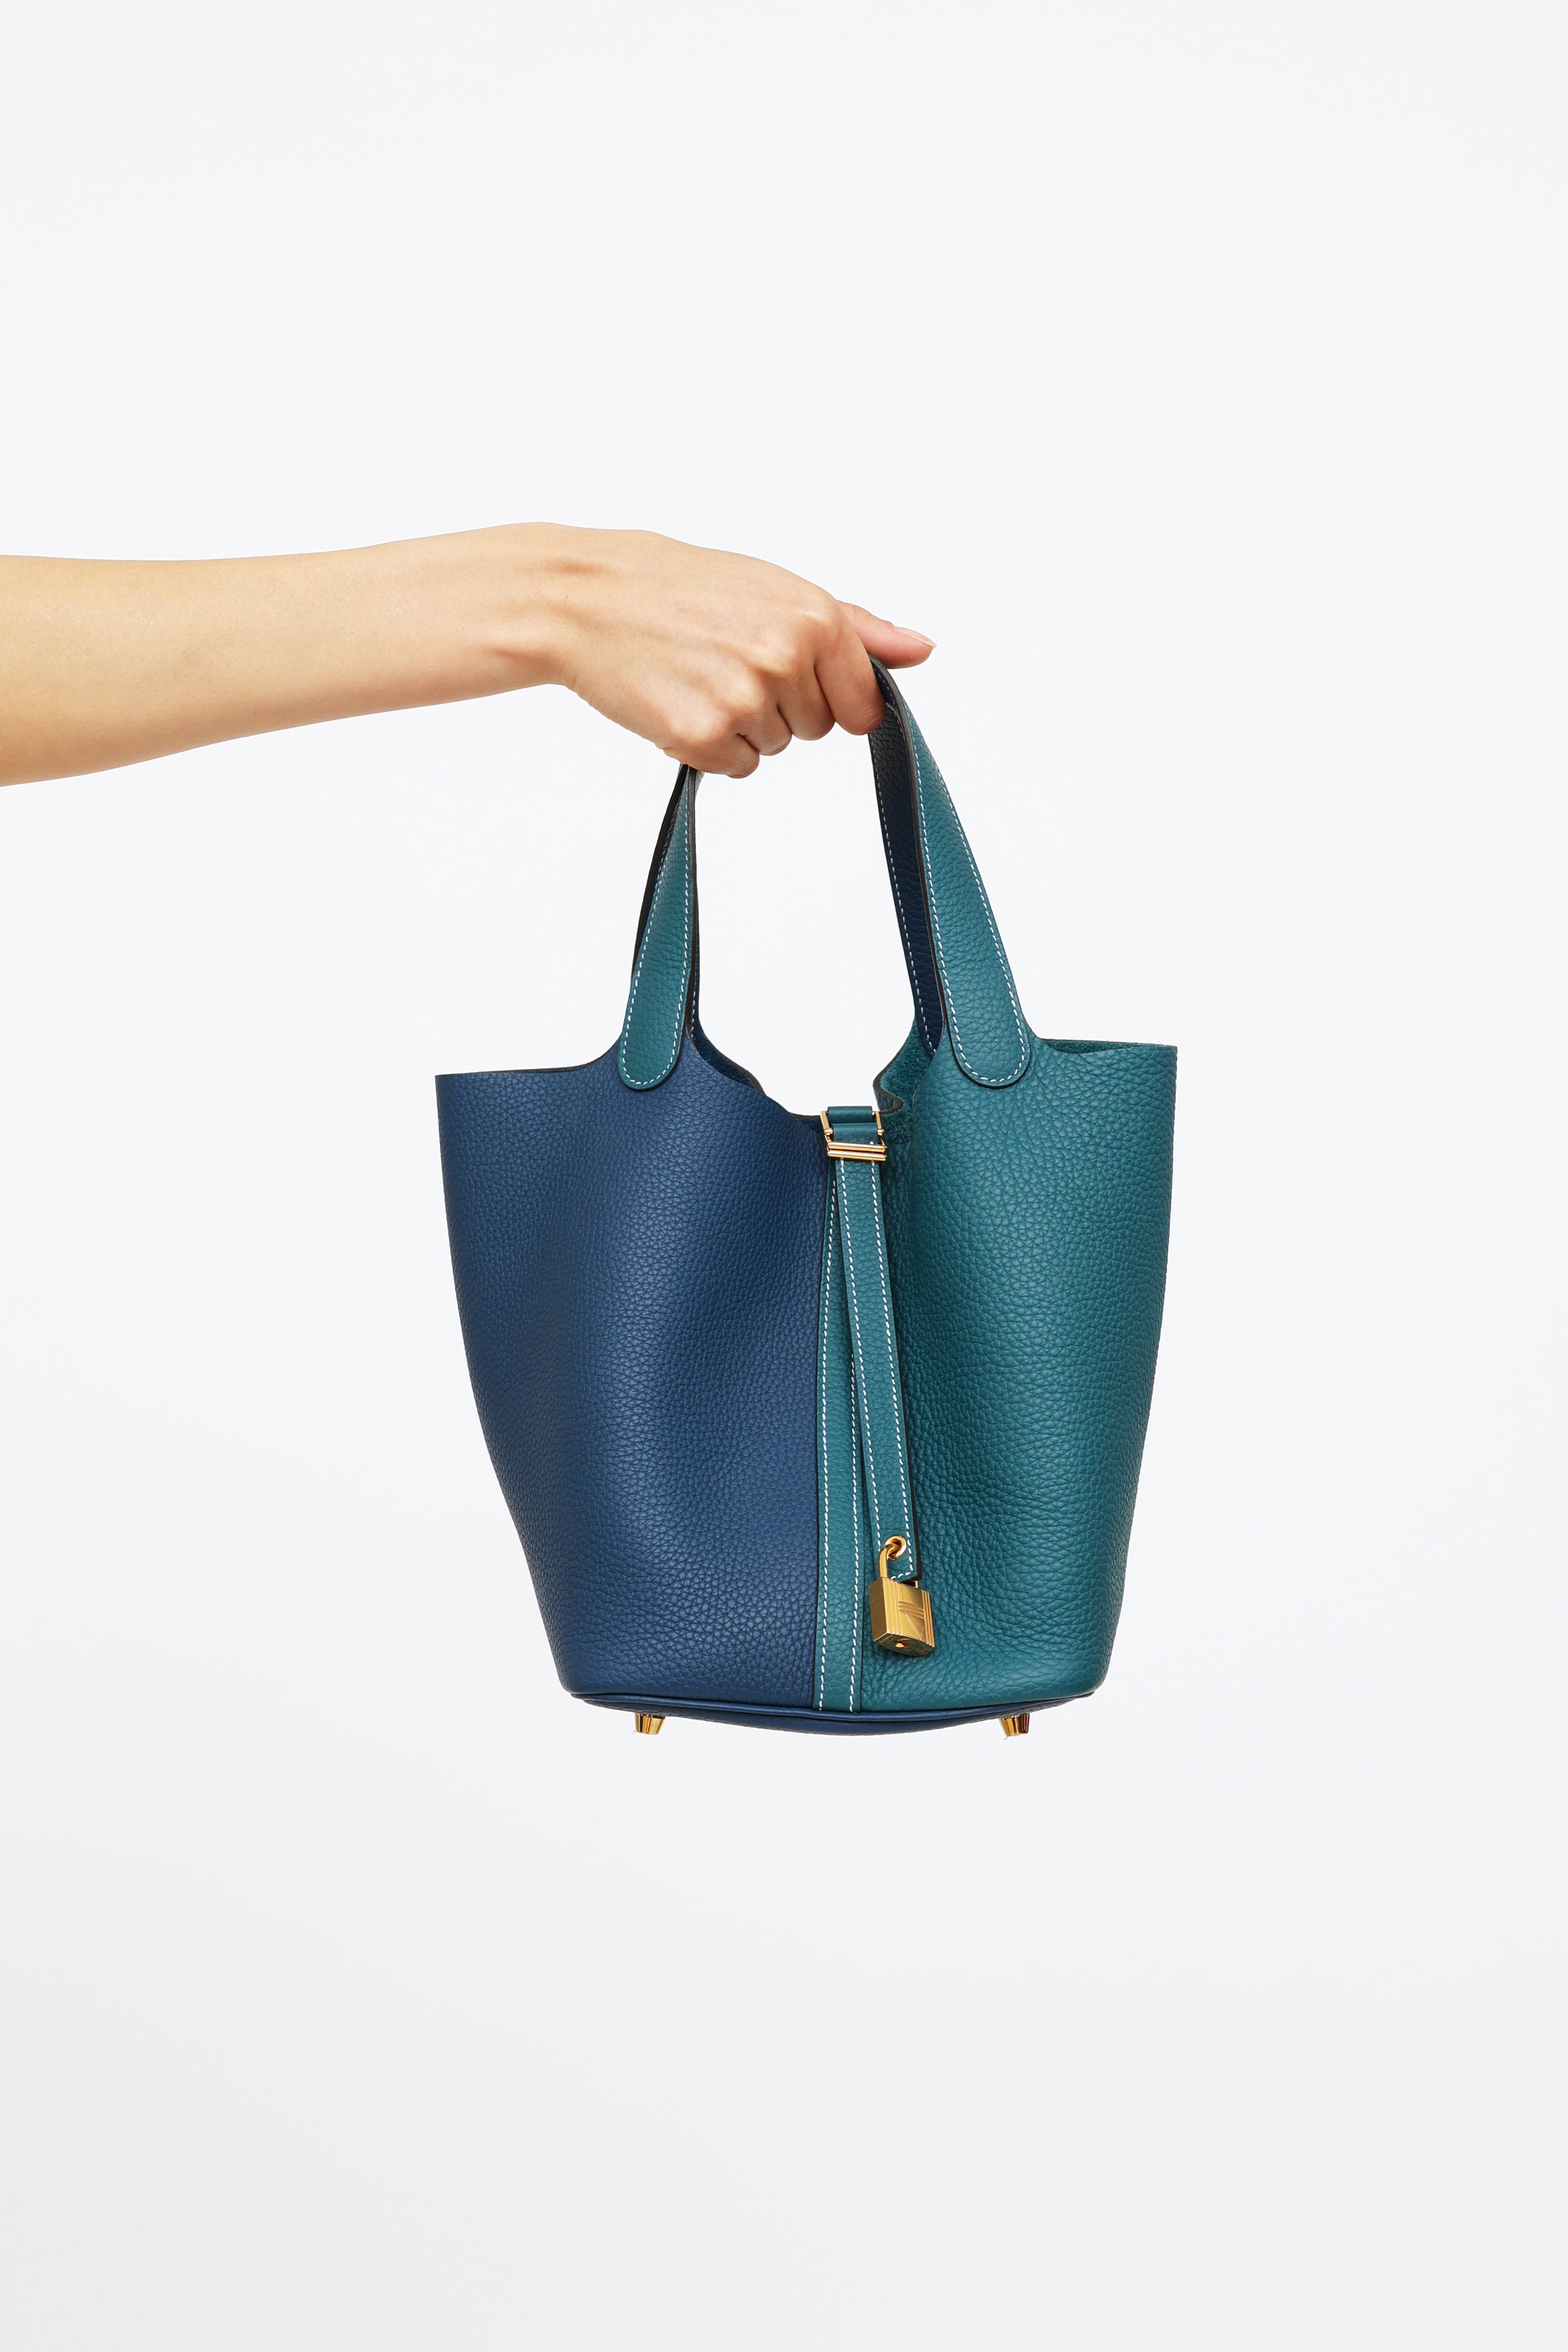 Picotin bag is such suitable for each season's casual daily look | Bags,  Minimalist fashion, Purses